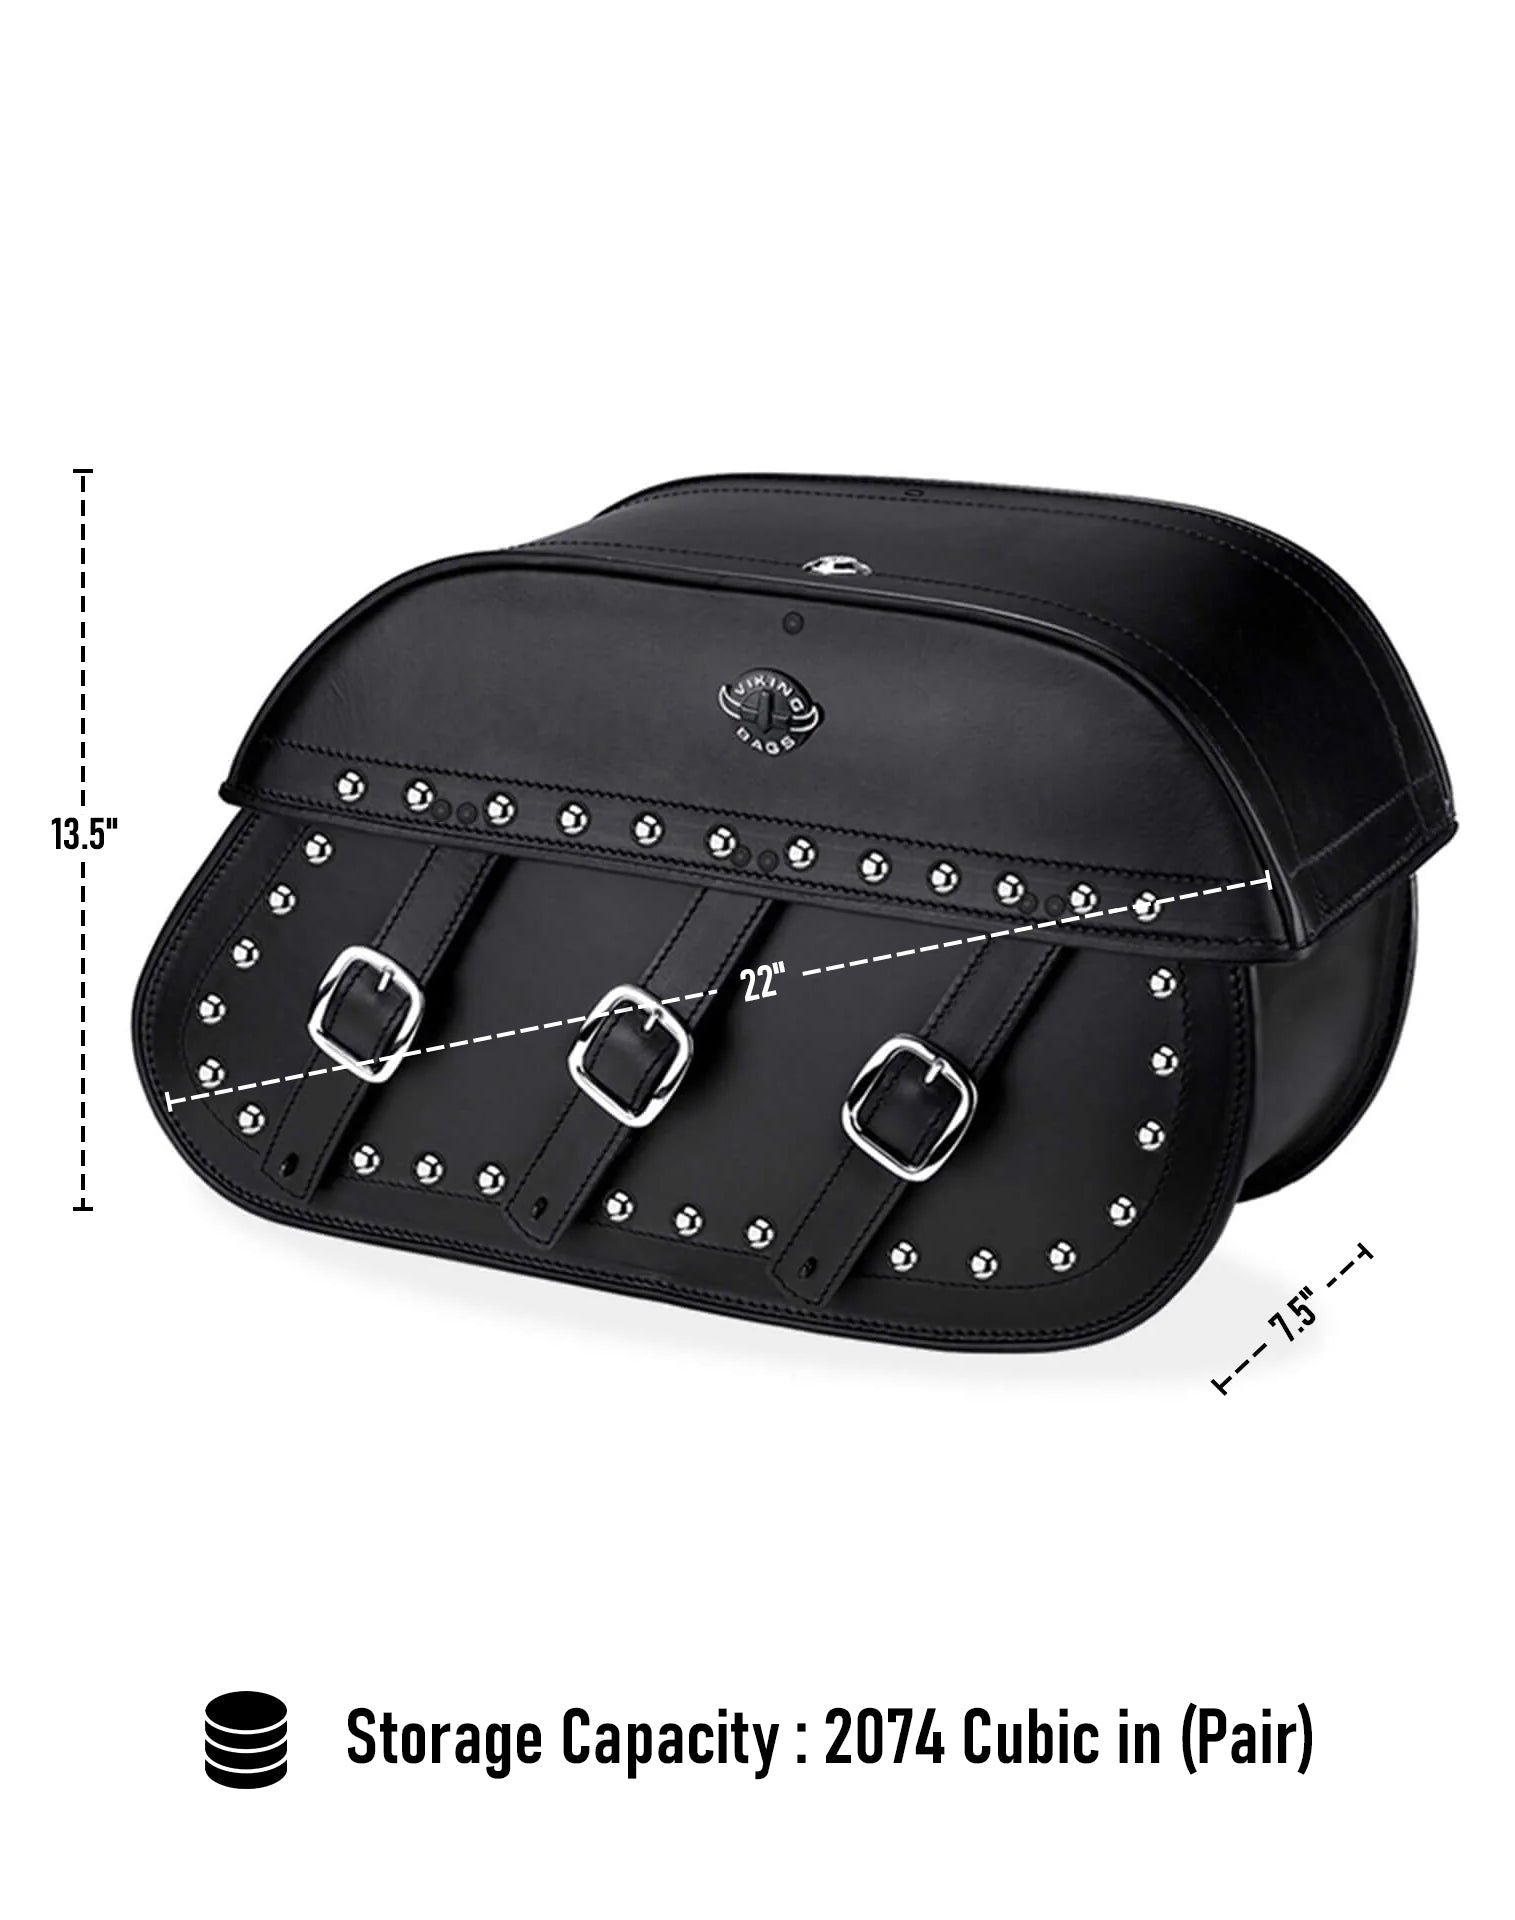 Viking Trianon Extra Large Studded Leather Motorcycle Saddlebags For Harley Softail Deluxe Flstn I Can Store Your Ridings Gears